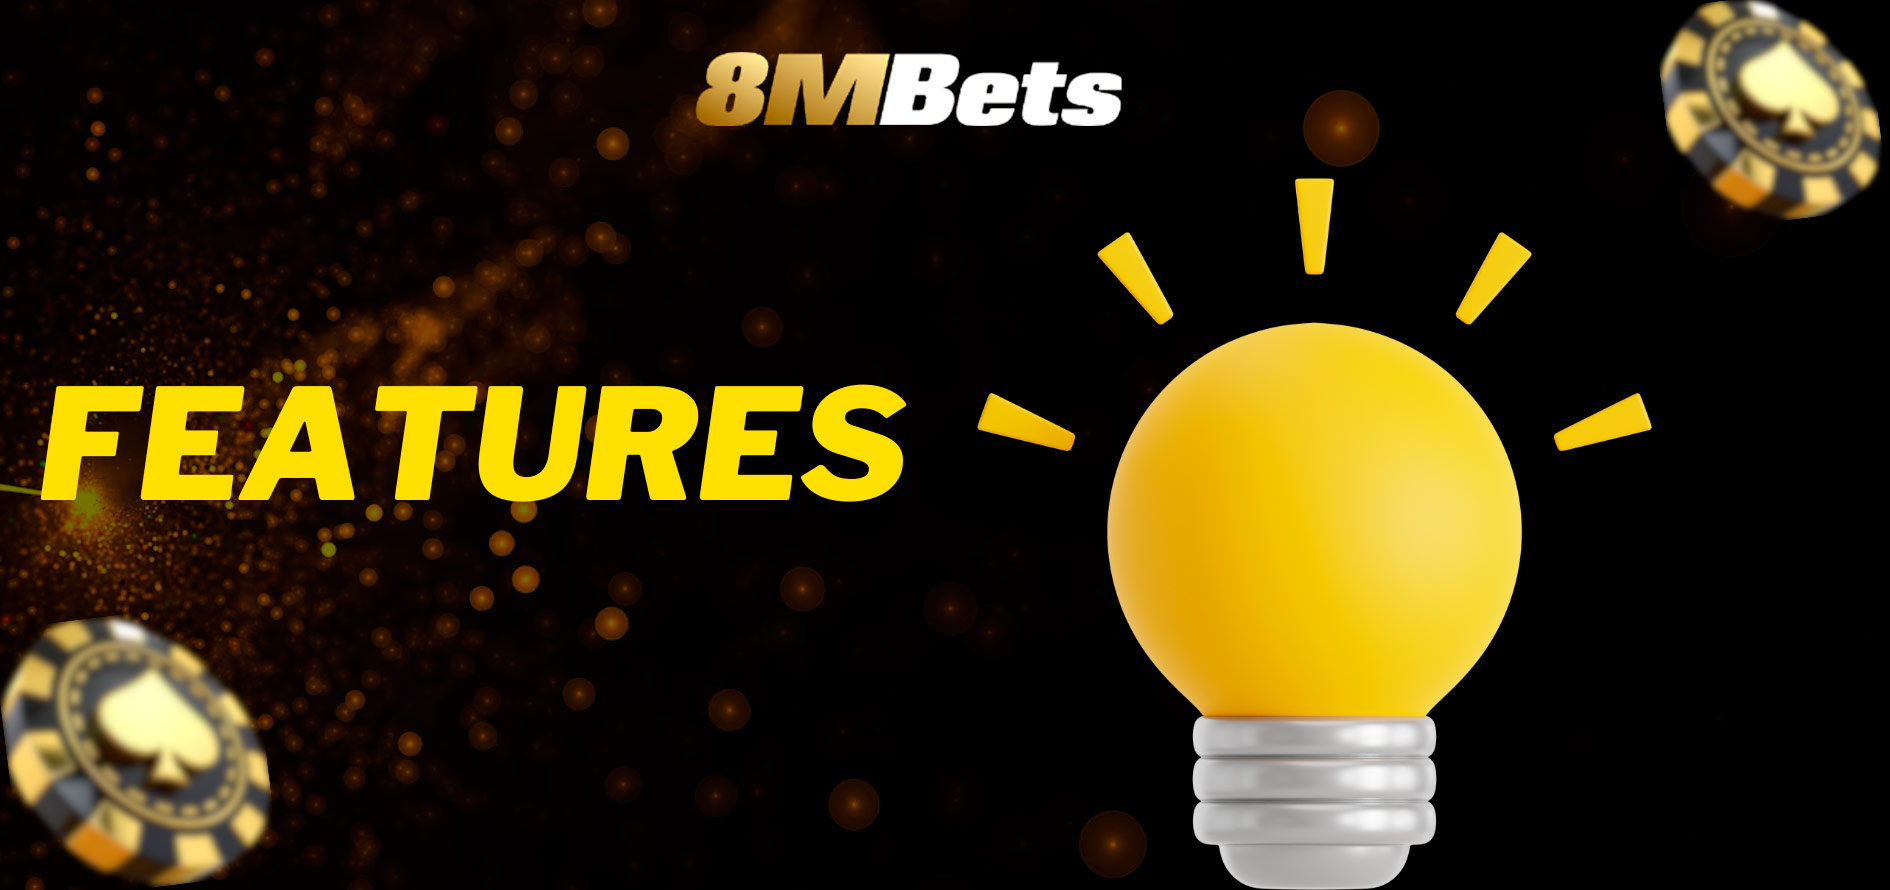 8mbets App: The Ultimate Online Betting Platform for Sports and Casino Games